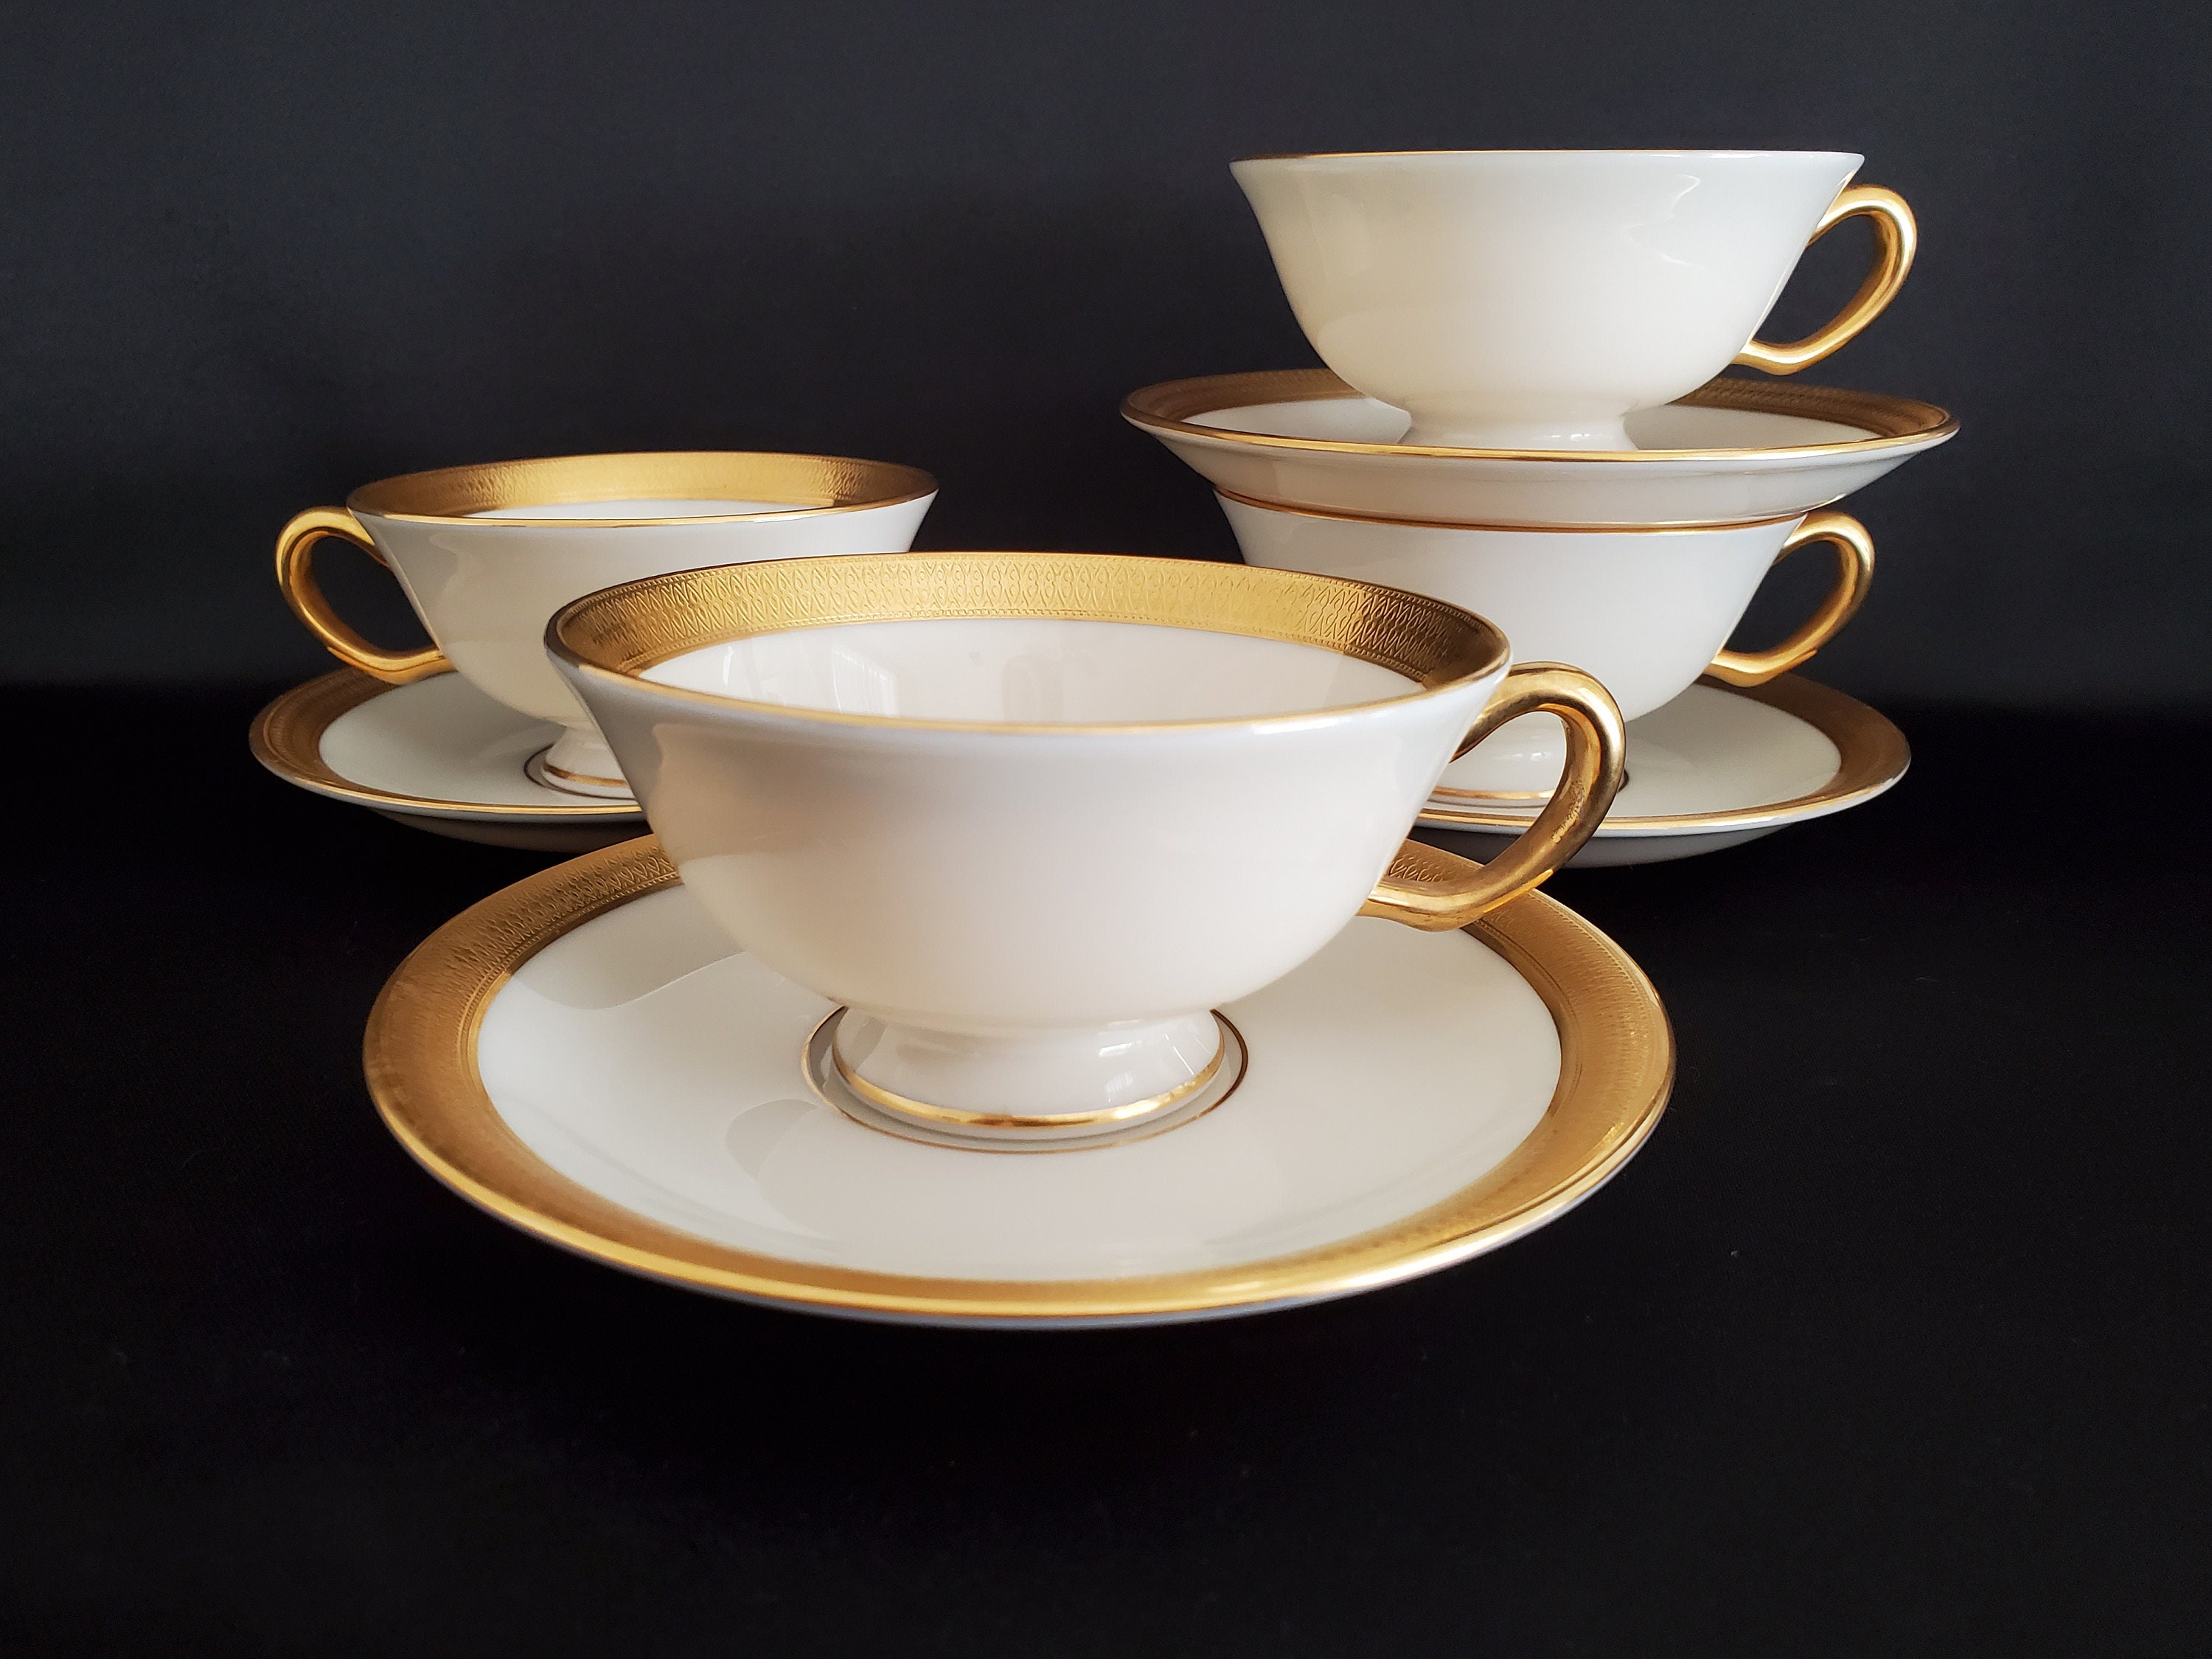 Chic 4pcs Tall Double Wall Footed Glass Tea Cups